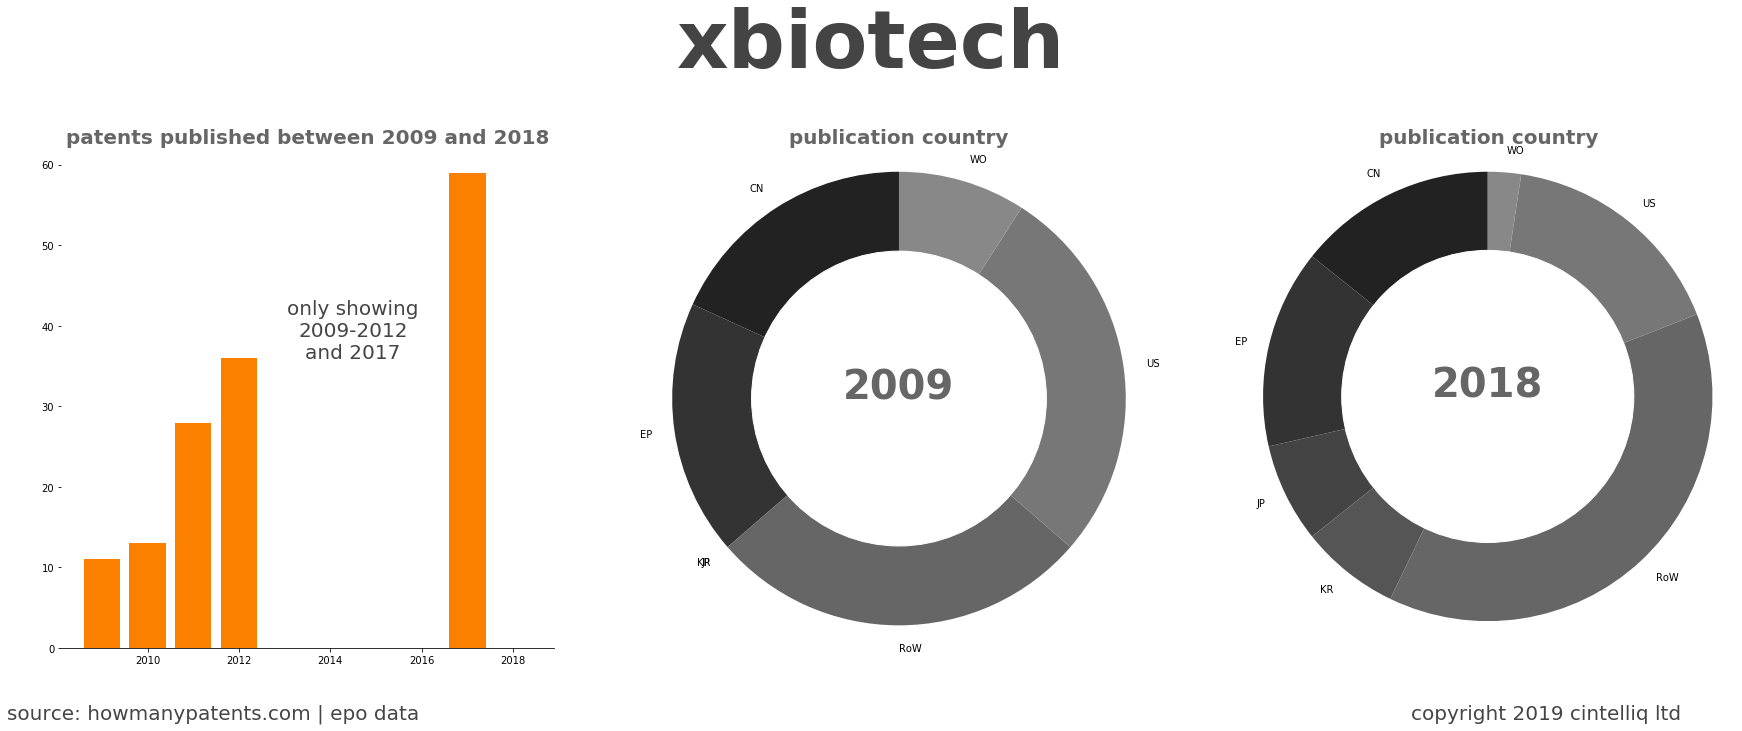 summary of patents for Xbiotech